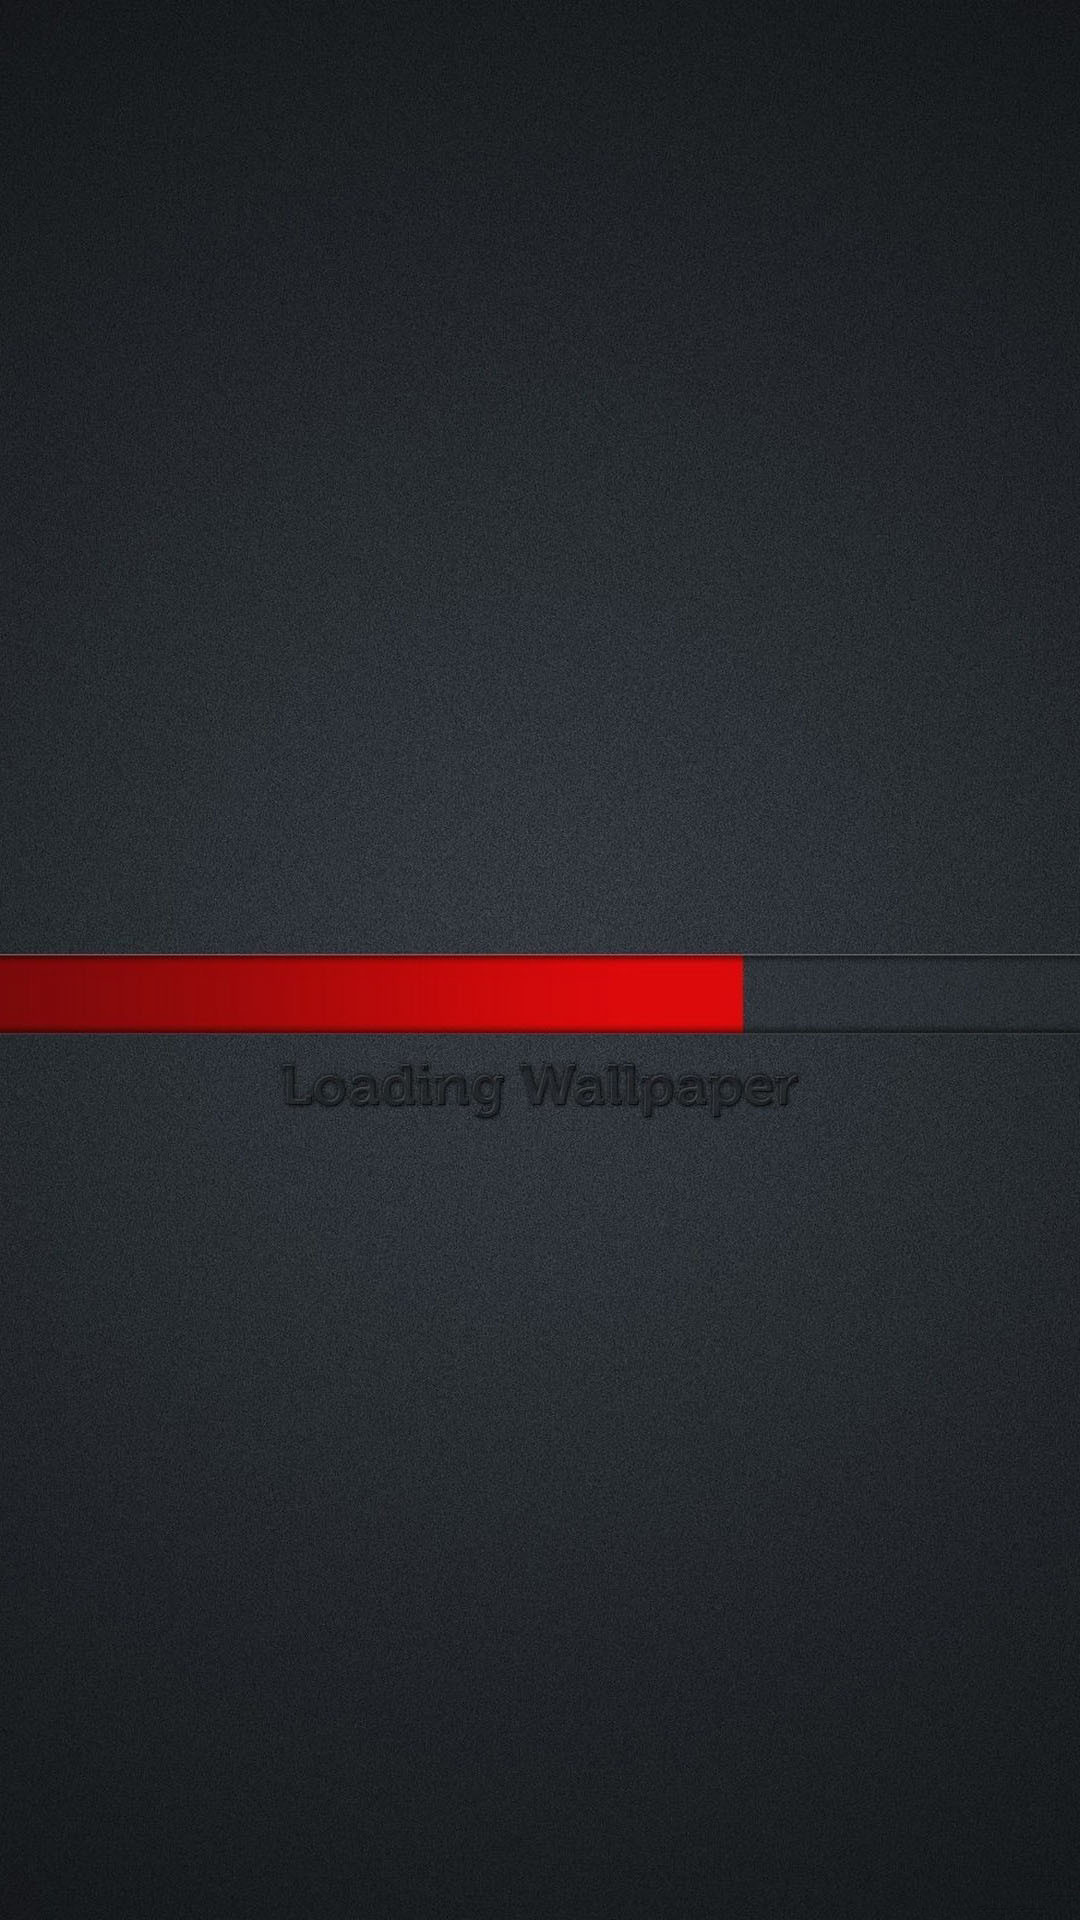 1080x1920 Loading Wallpaper Red Line Grey Background Android Wallpaper ...